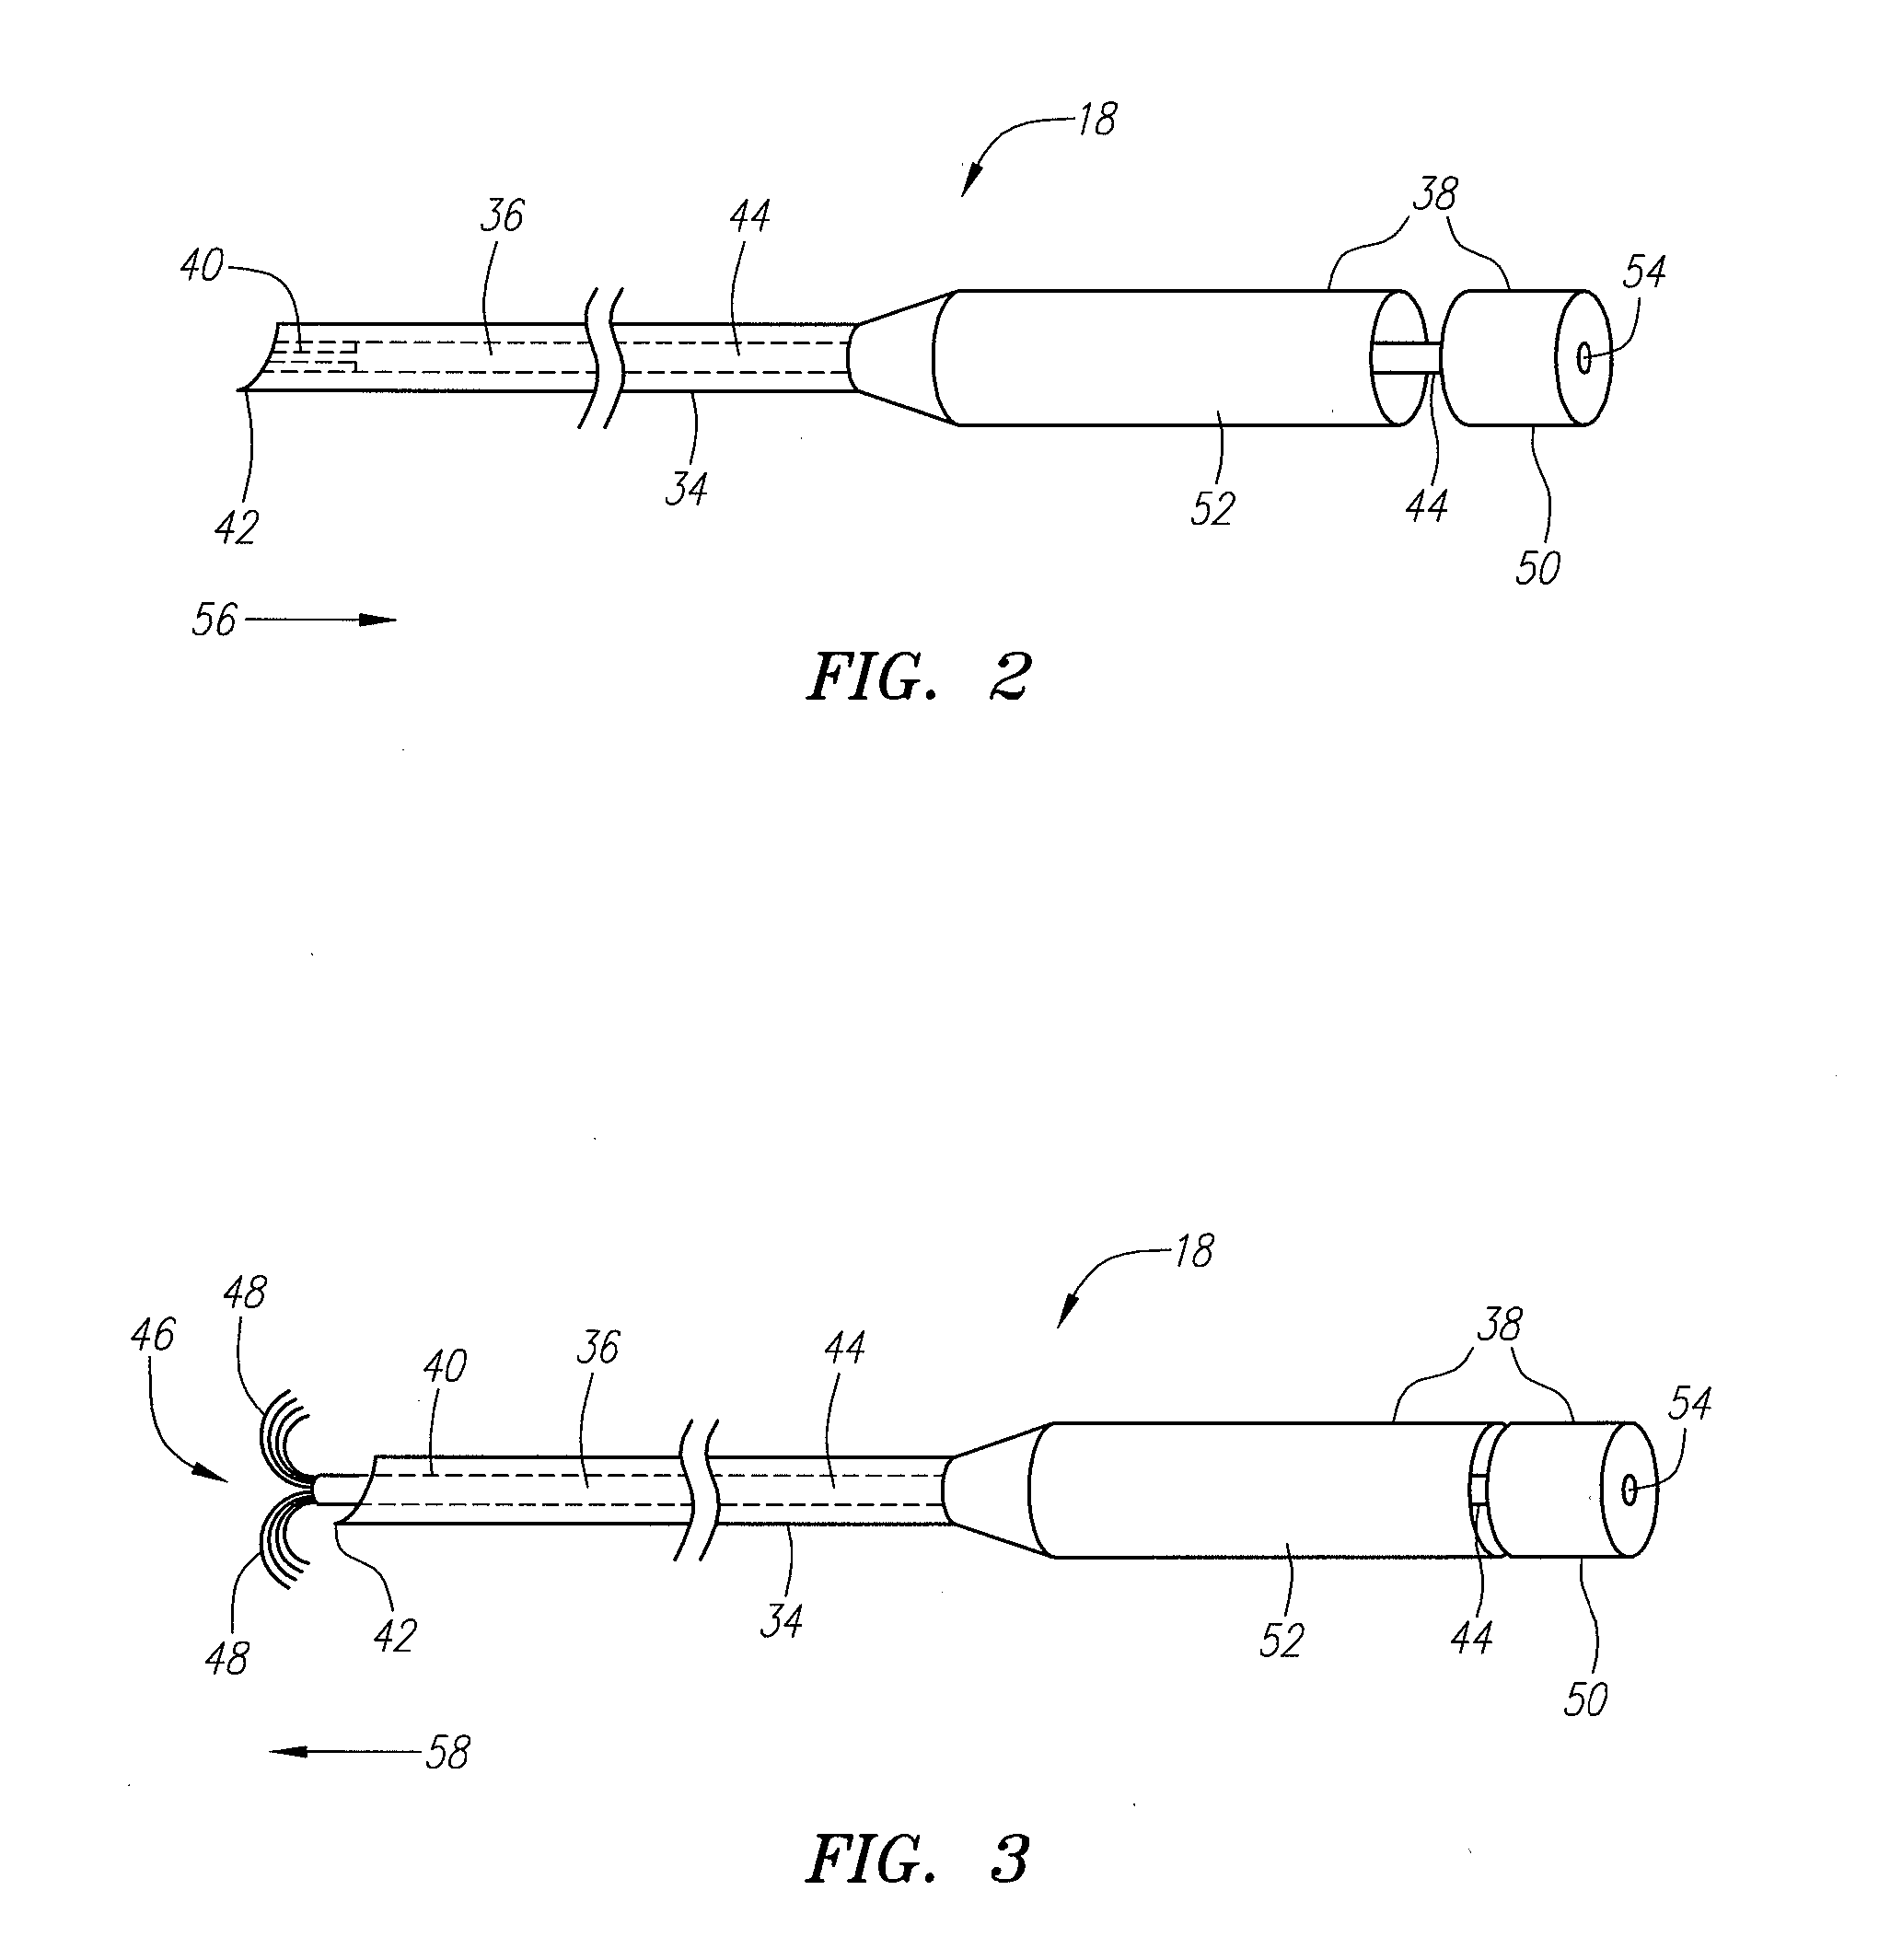 Radiation ablation tracking system and method